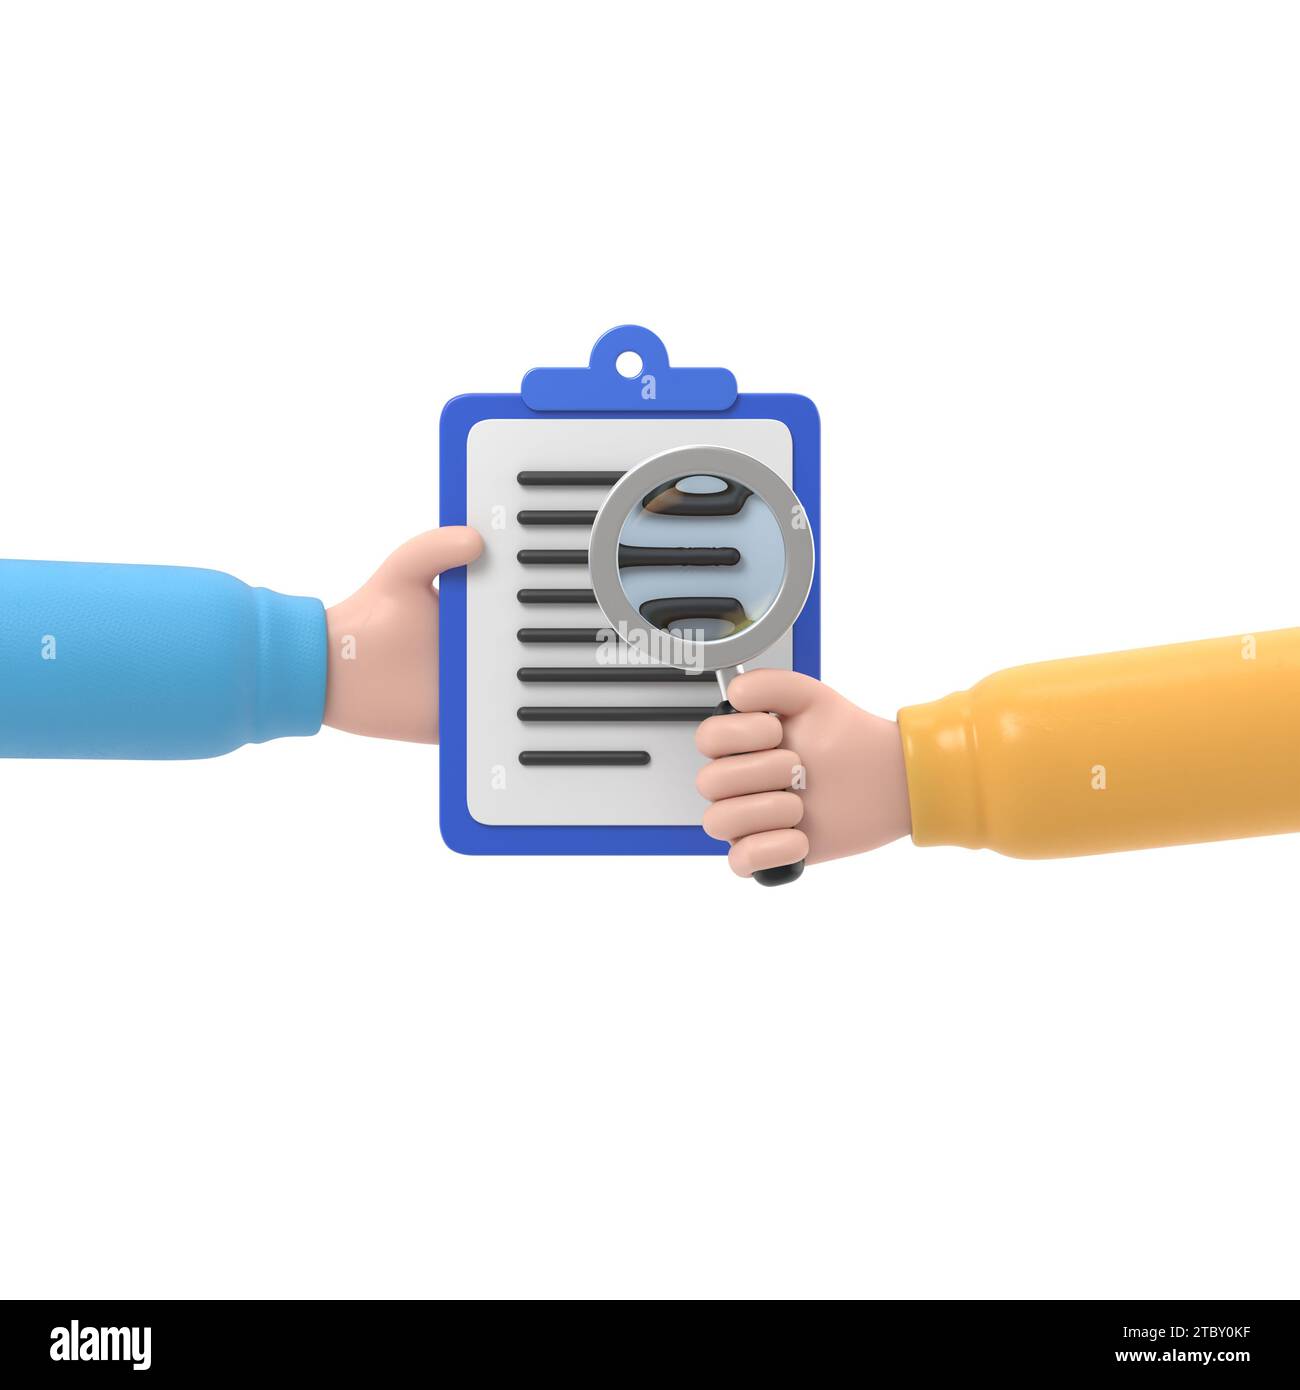 Business concept contract inspection,hands holding the contract and examine its conditions through a magnifying glass.3D rendering on white background Stock Photo